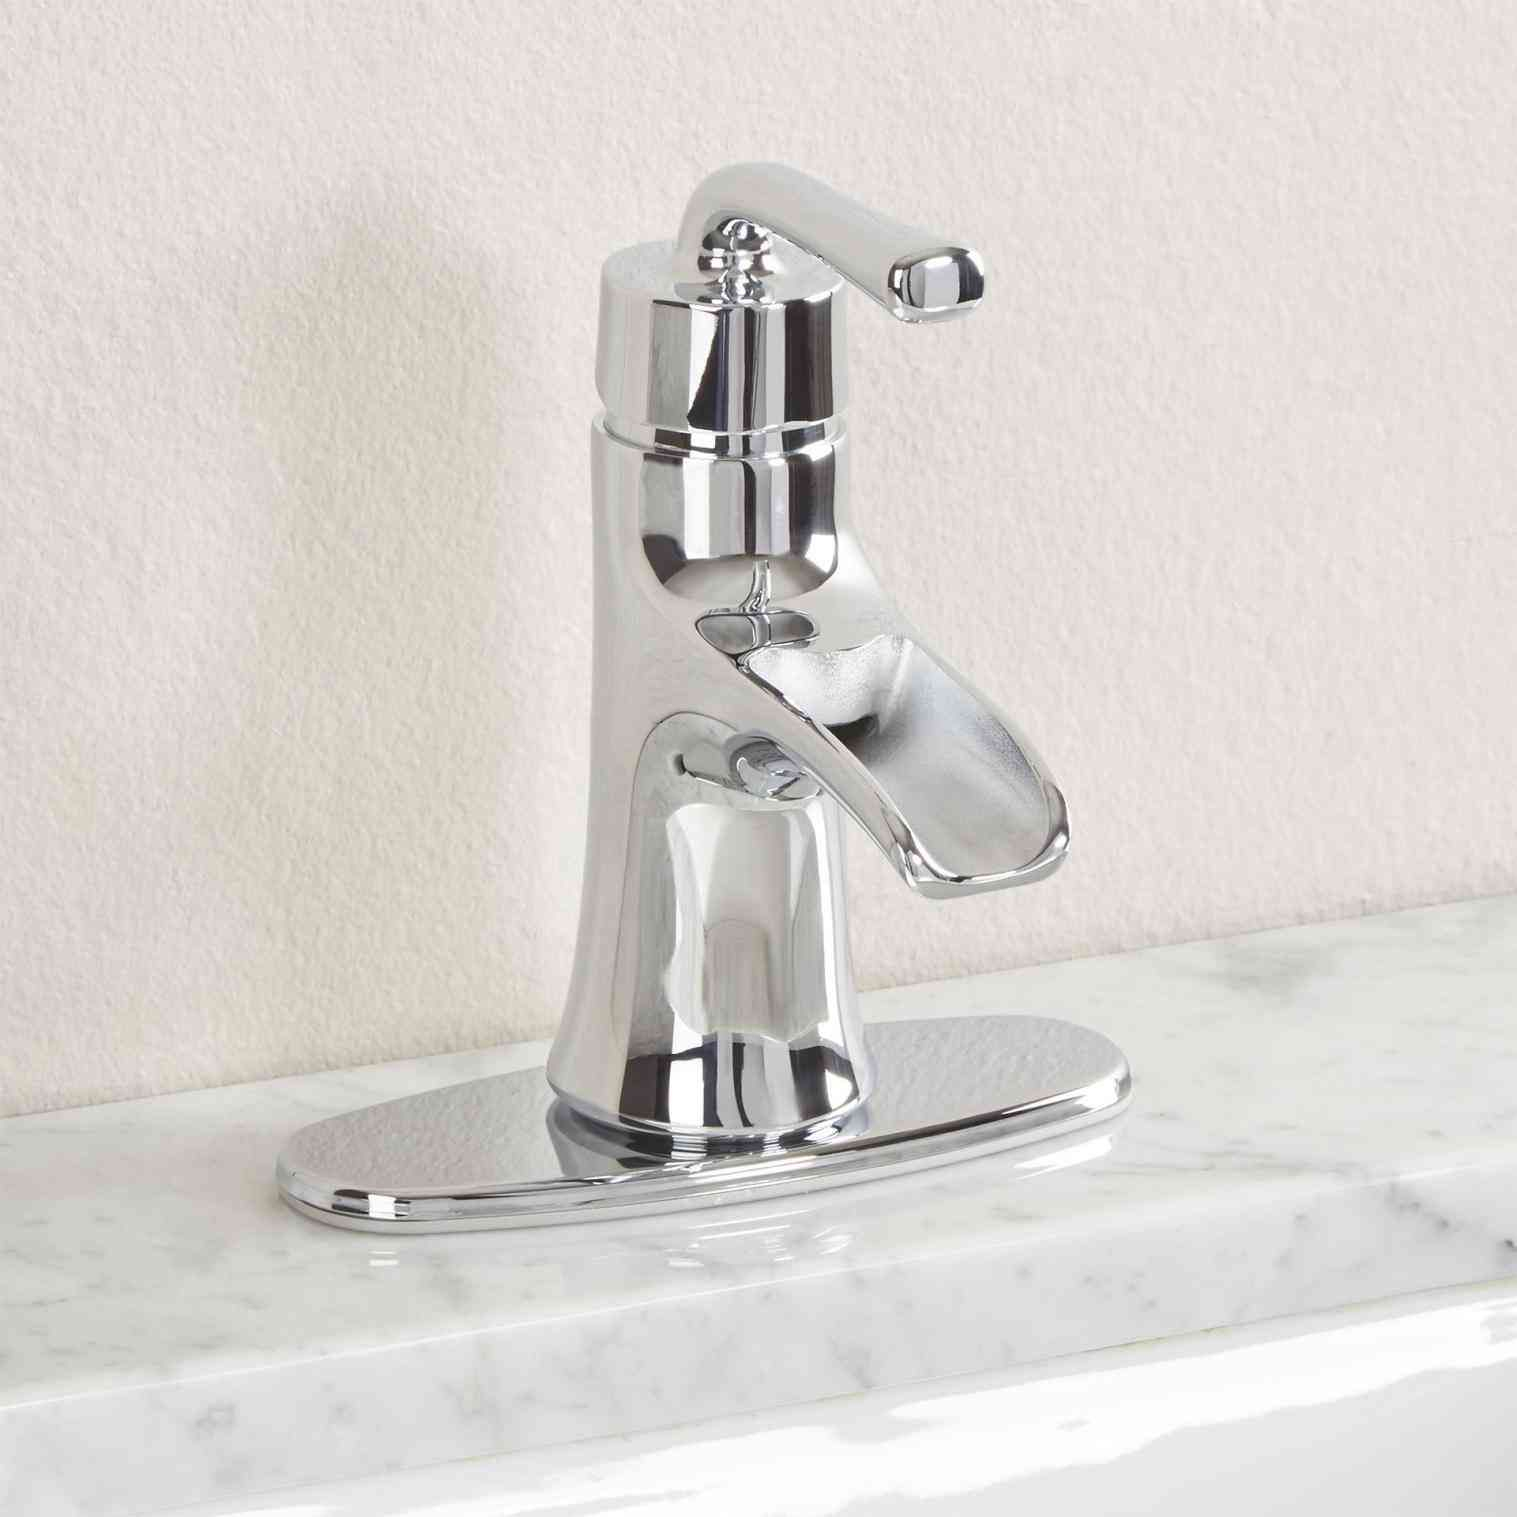 Bathroom Faucet Ratings Home And Garden within proportions 1517 X 1517